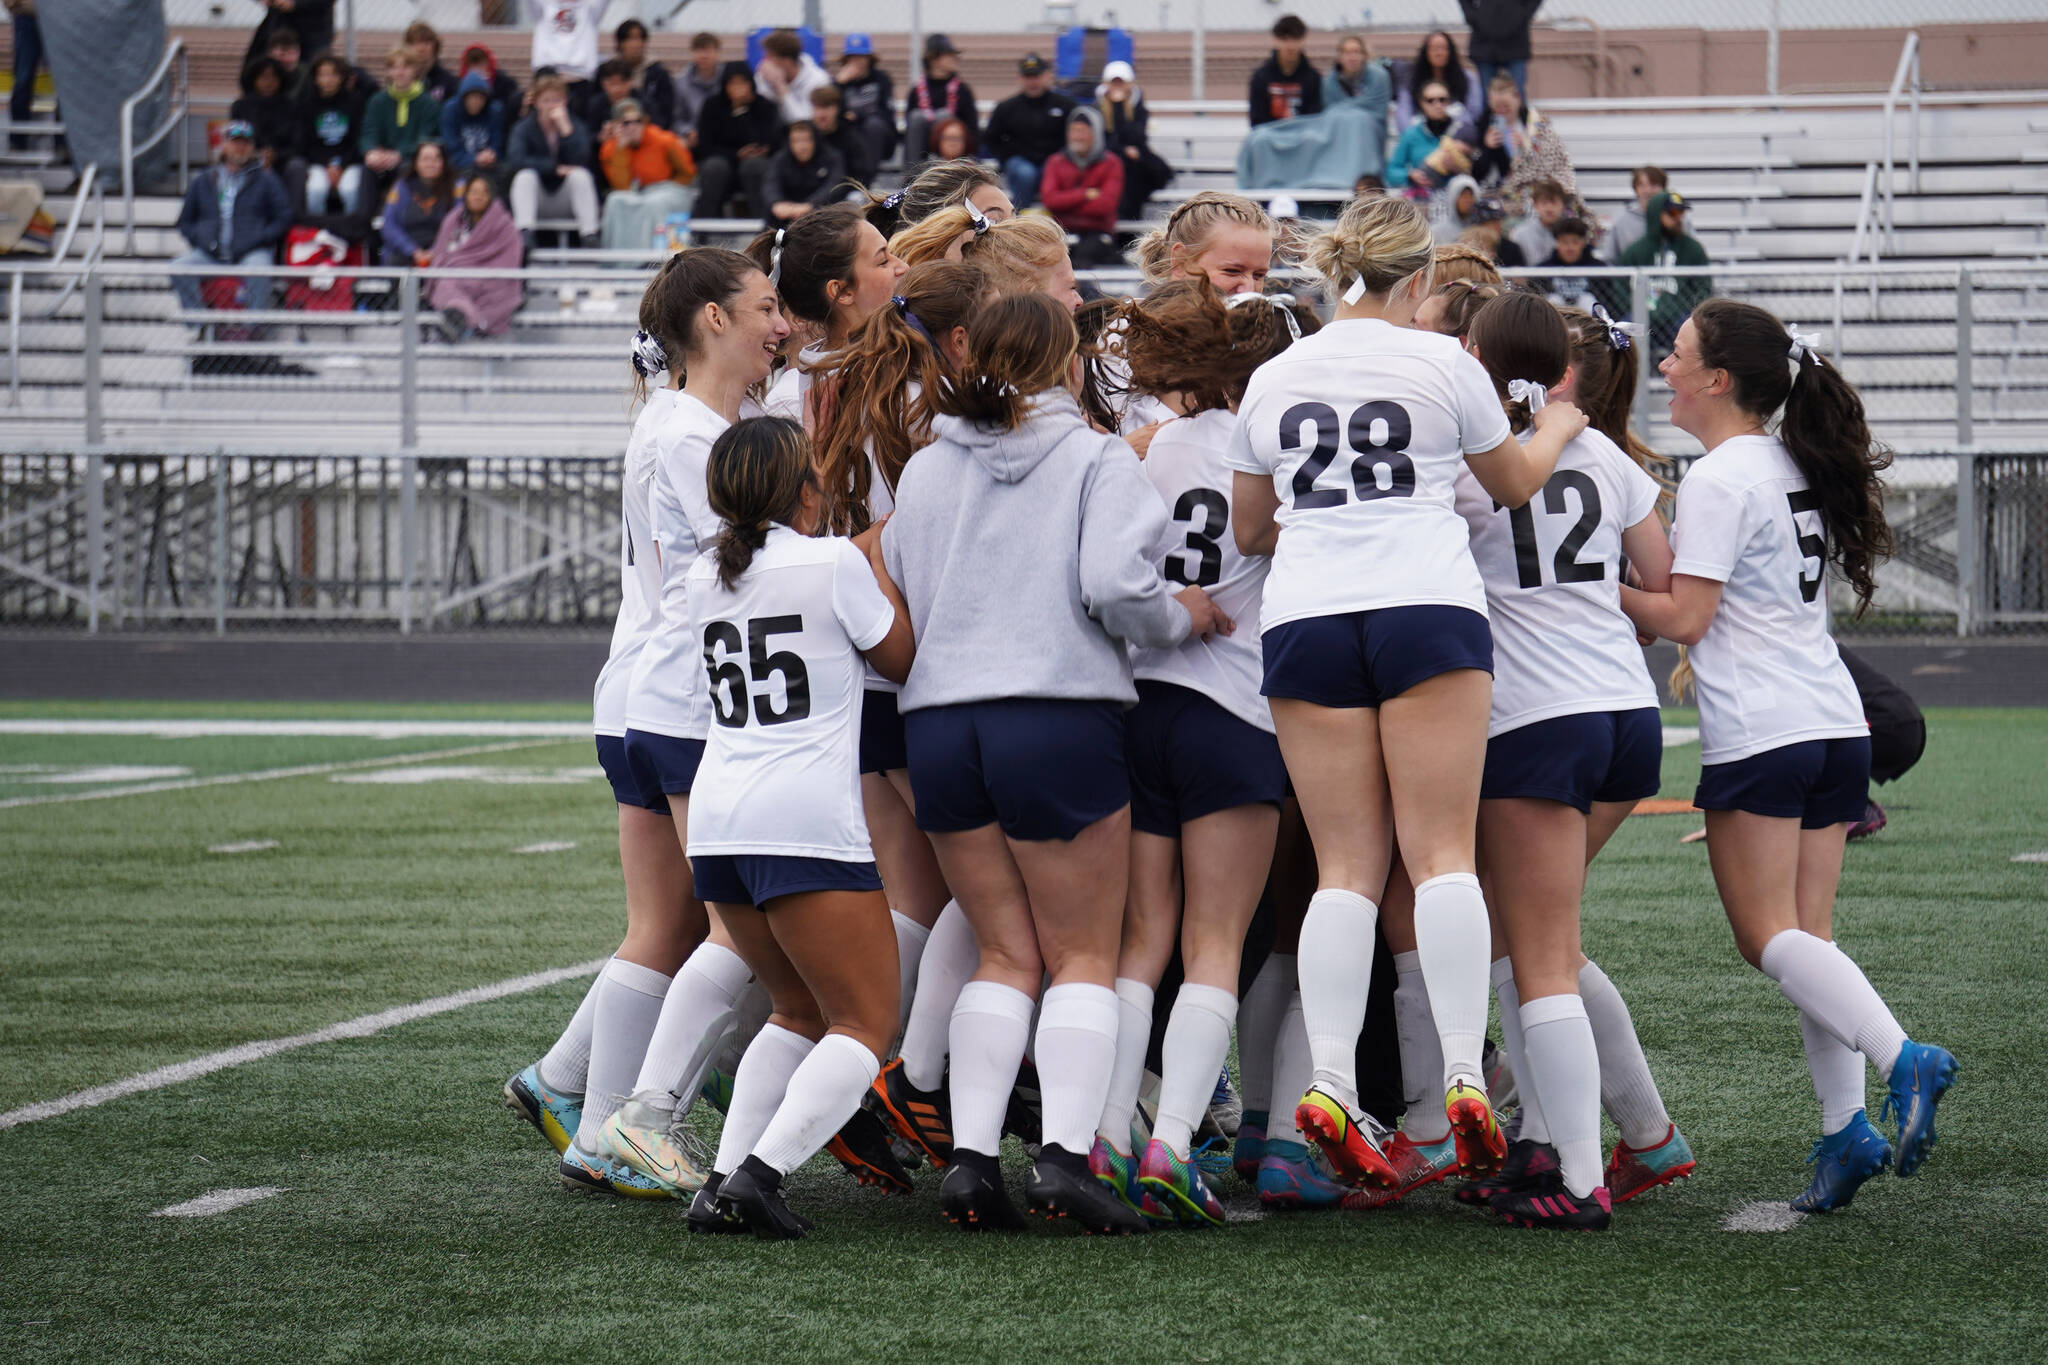 The Soldotna Stars celebrate after winning the Division II Soccer State Championship on Saturday, May 27, 2023, at West Anchorage High School in Anchorage, Alaska. (Jake Dye/Peninsula Clarion)